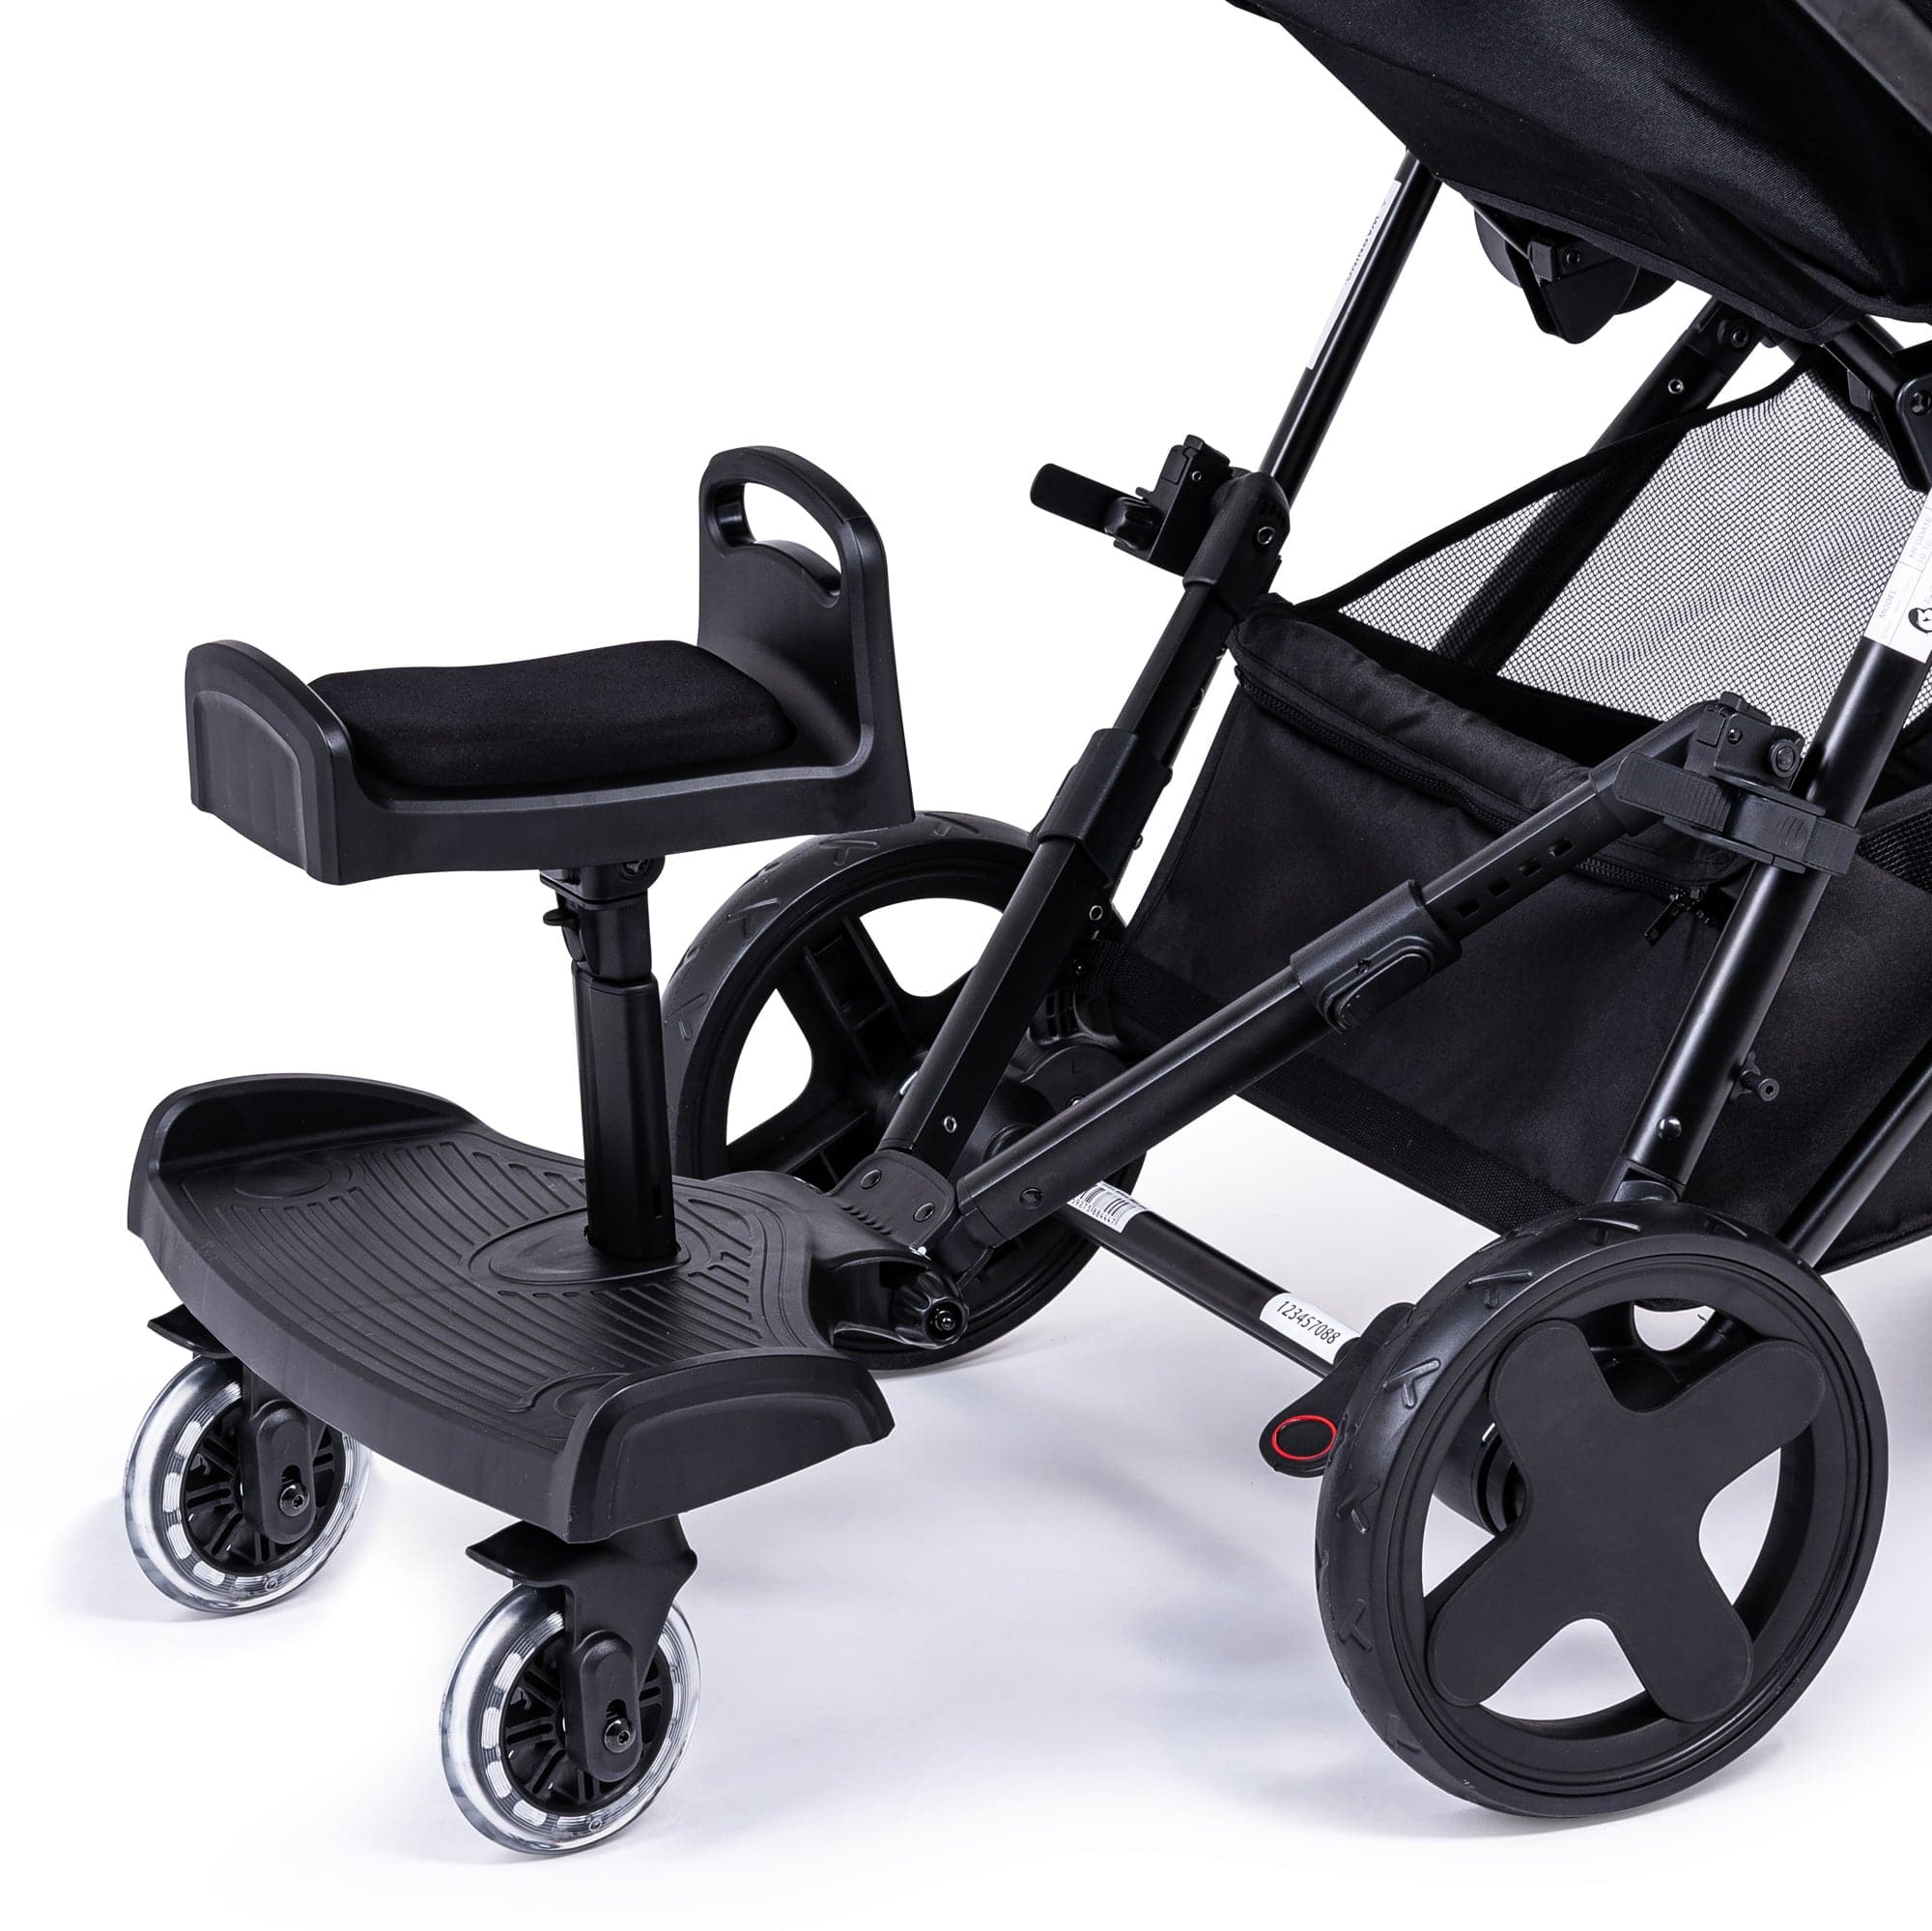 Ride On Board with Seat Compatible with ABC Design - For Your Little One